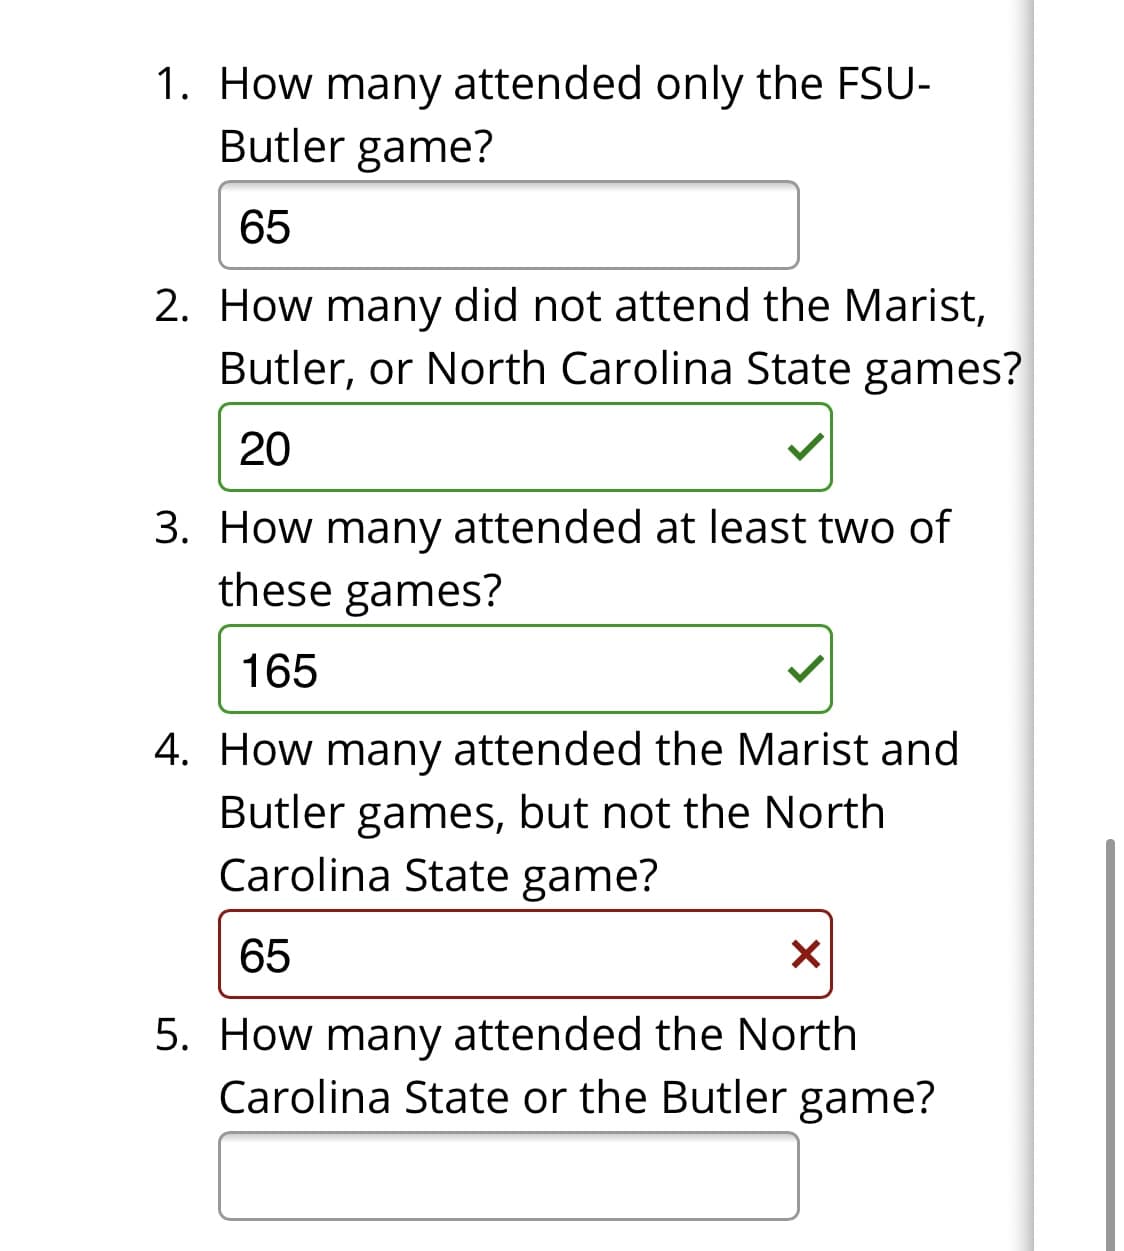 1. How many attended only the FSU-
Butler game?
65
2. How many did not attend the Marist,
Butler, or North Carolina State games?
20
3. How many attended at least two of
these games?
165
4. How many attended the Marist and
Butler games, but not the North
Carolina State game?
65
5. How many attended the North
Carolina State or the Butler game?
